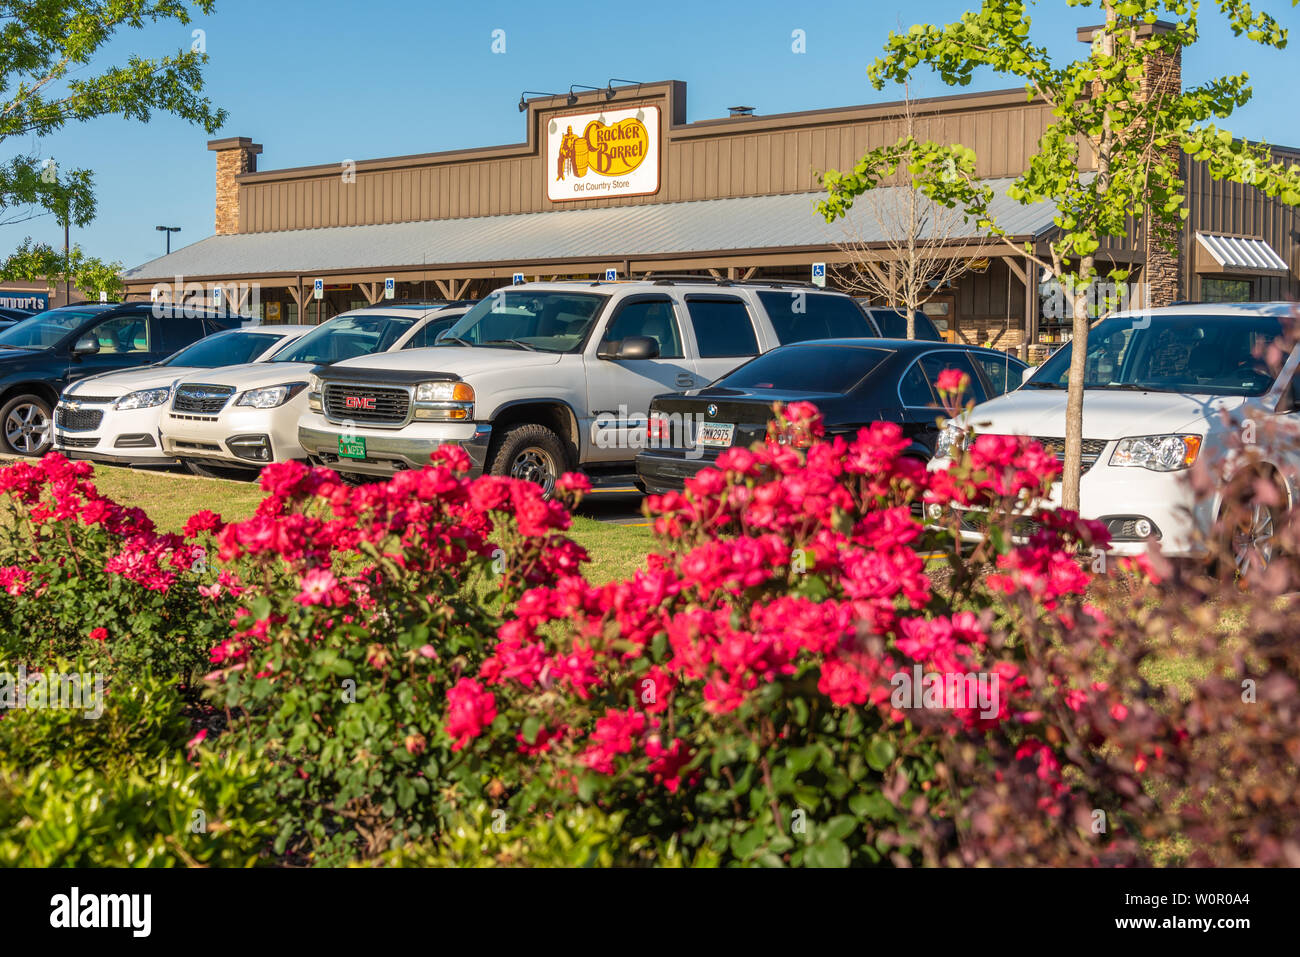 Popular Southern-cooking restaurant, Cracker Barrel Old Country Store, in Snellville, Georgia. (USA) Stock Photo